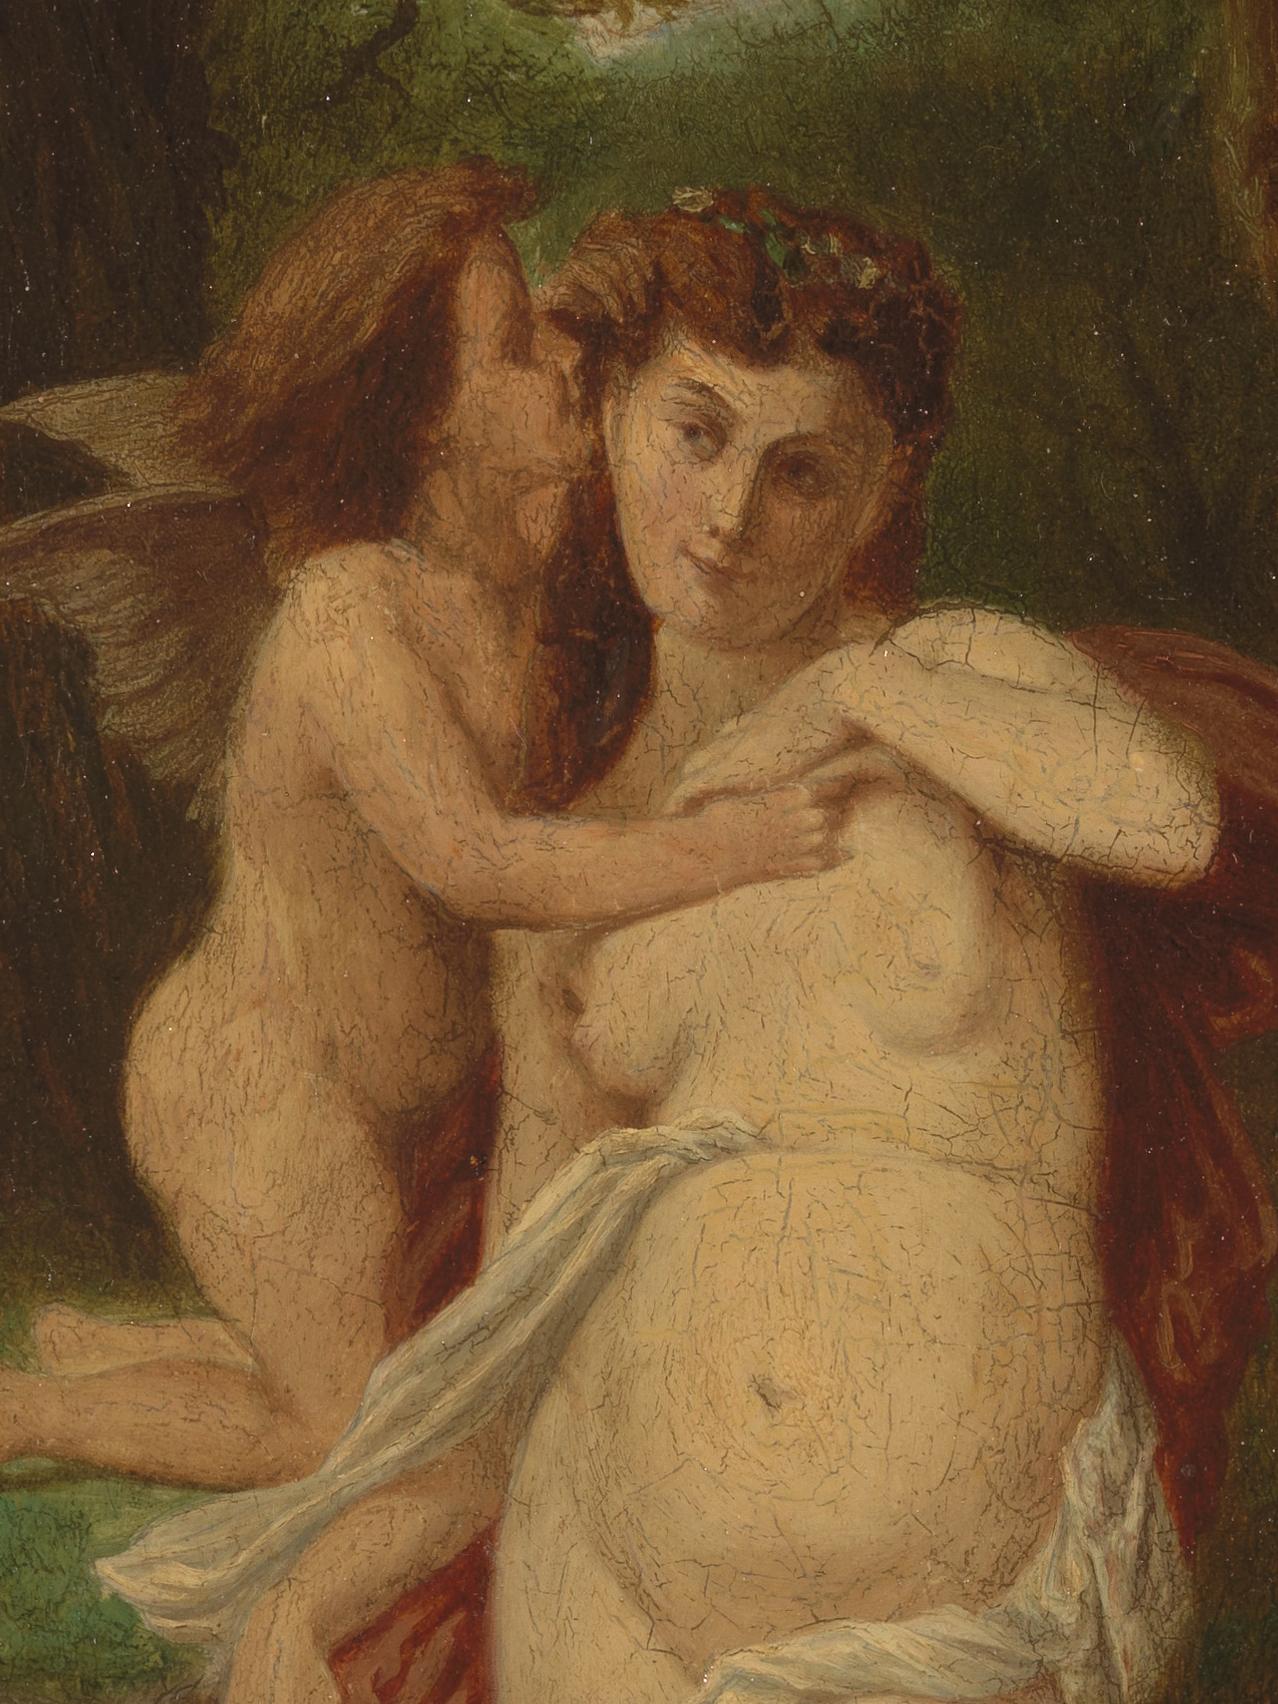 This 19th century oil on canvas depicts the first kiss between Cupid and Psyche. It symbolizes the moment of innocence right before the sexual awakening happens. The two characters are naked, with Psyche in the front and center of the painting. She